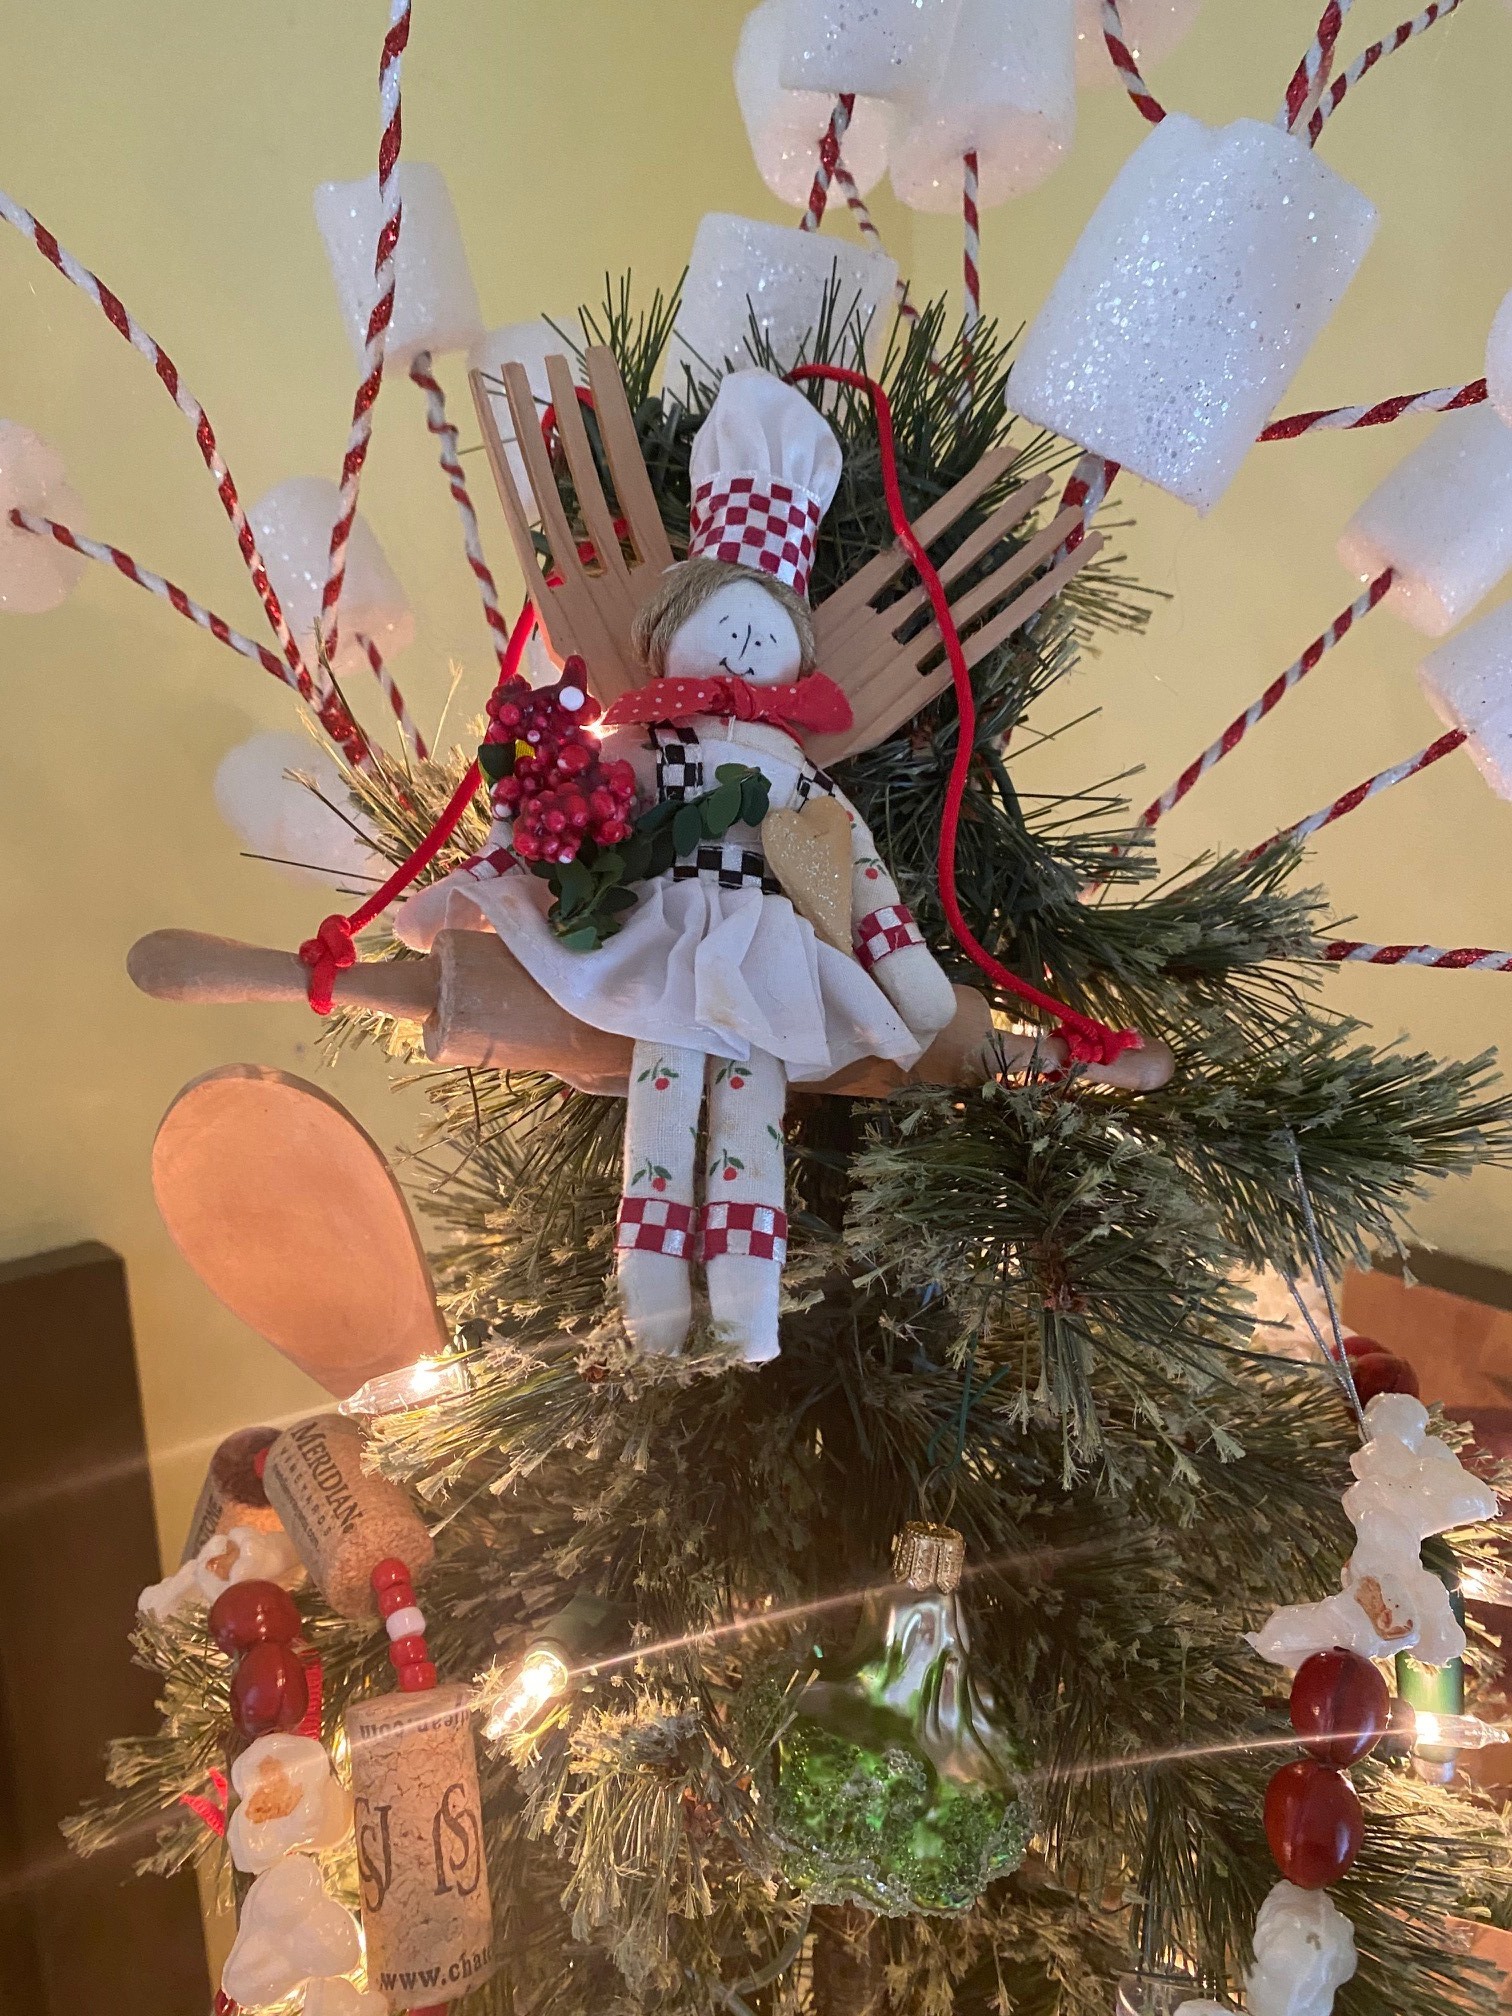 Ginny loves Christmas and says she’s 'cut down' to just four Christmas trees! This is the tree topper for her kitchen tree.